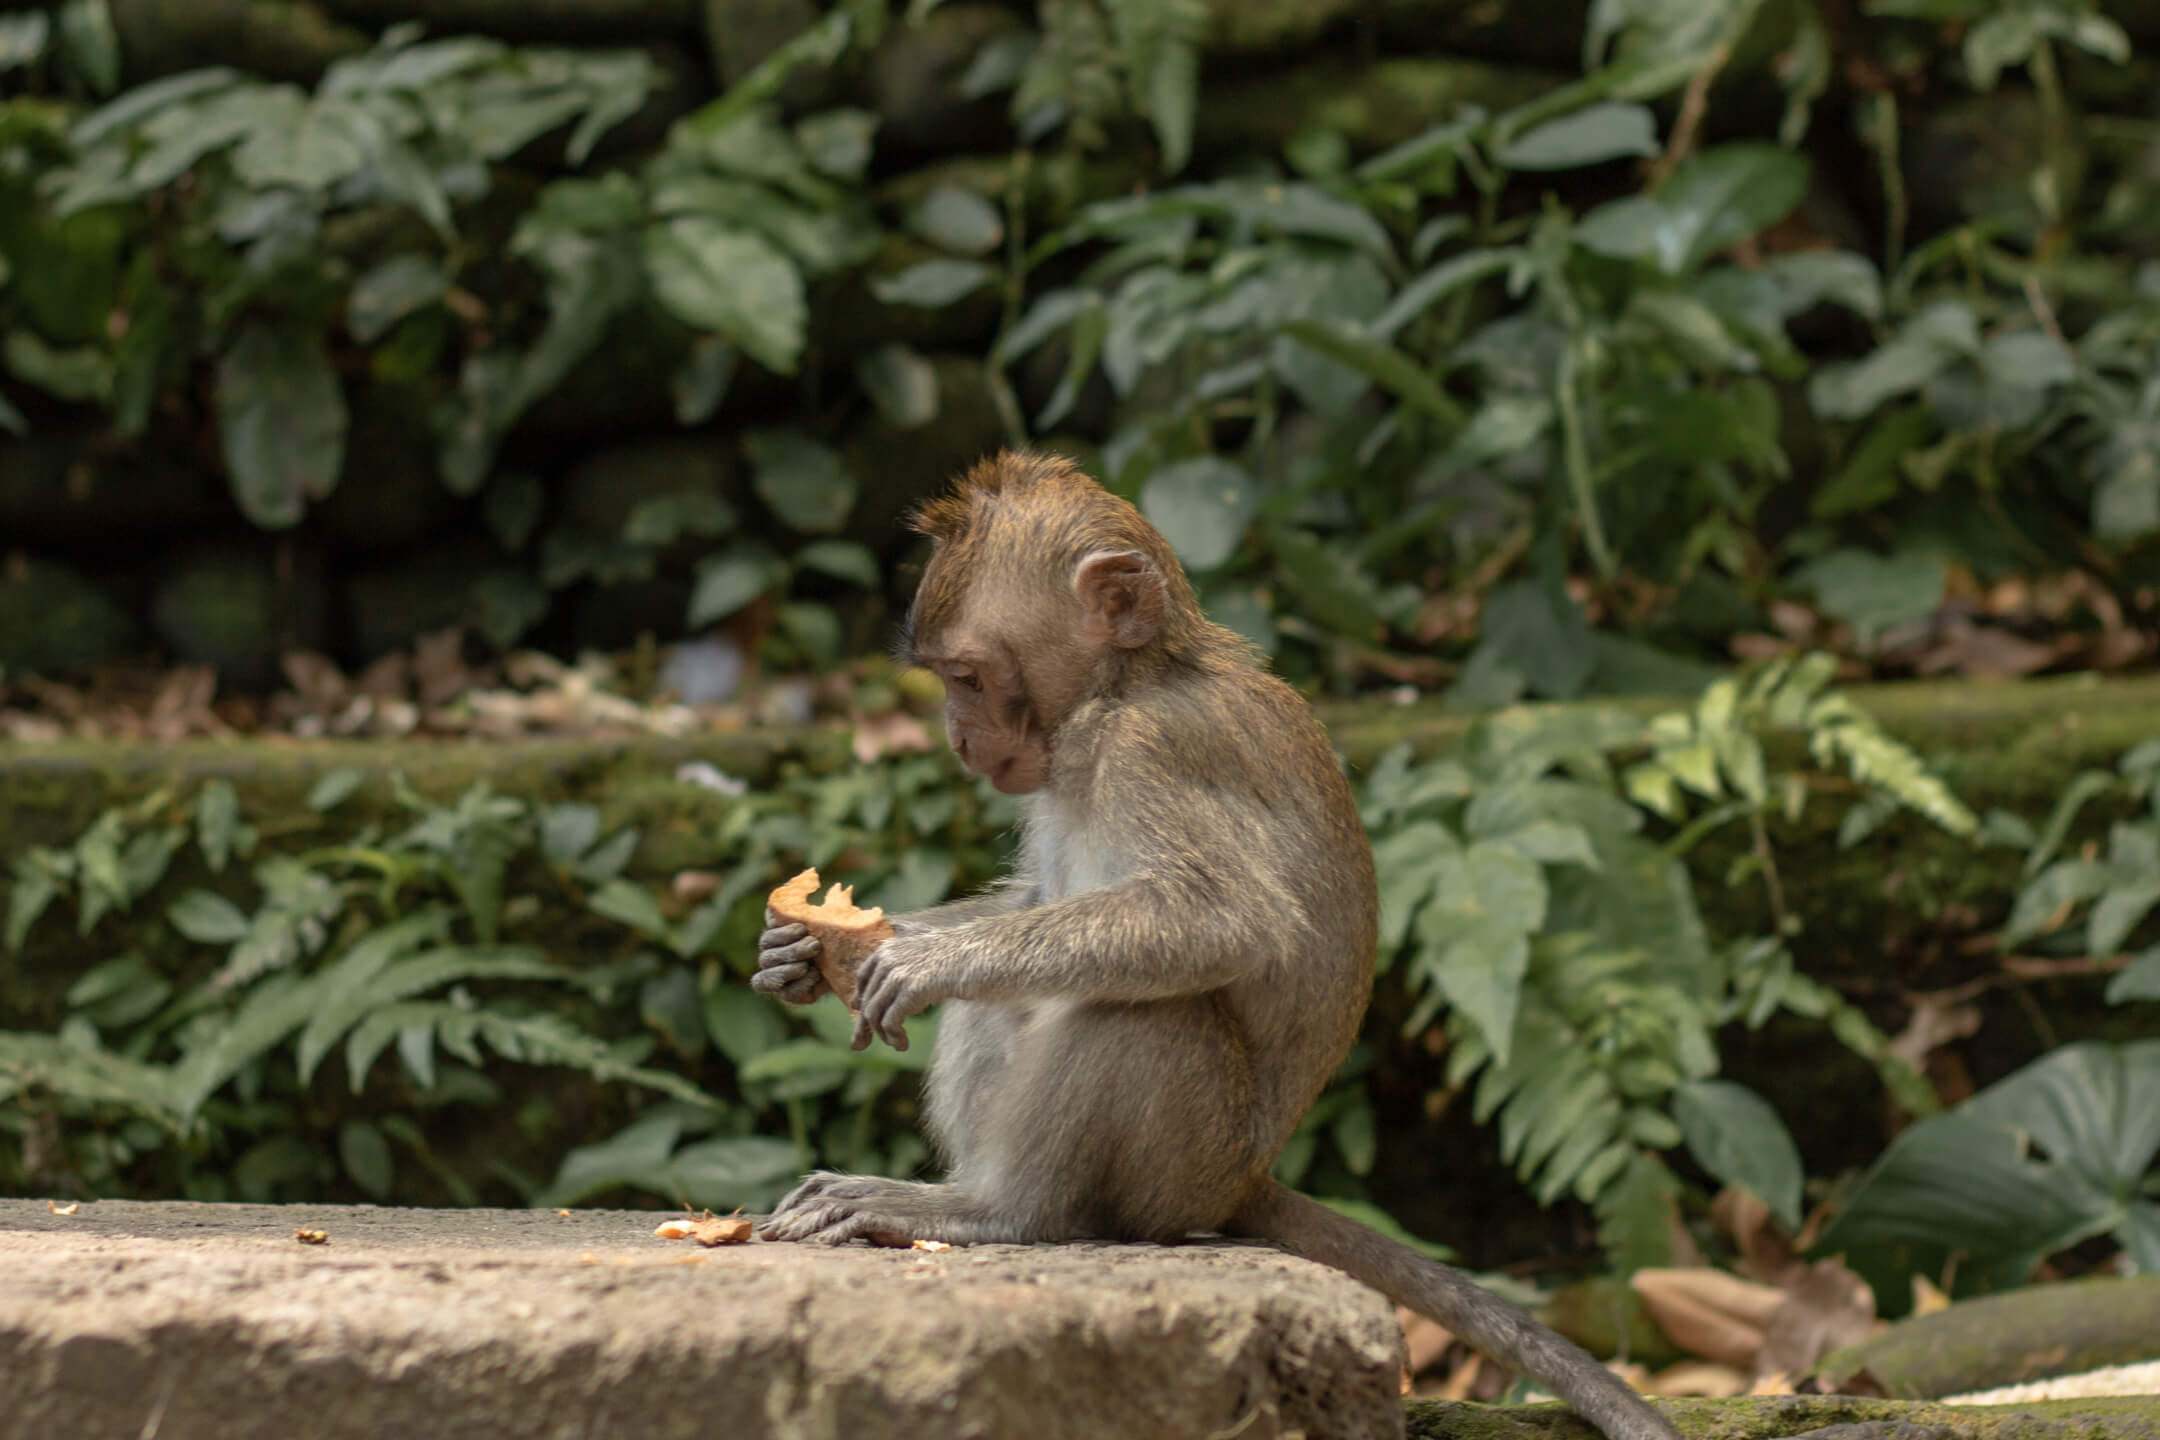 The Ultimate Guide To The Ubud Monkey Forest In Bali